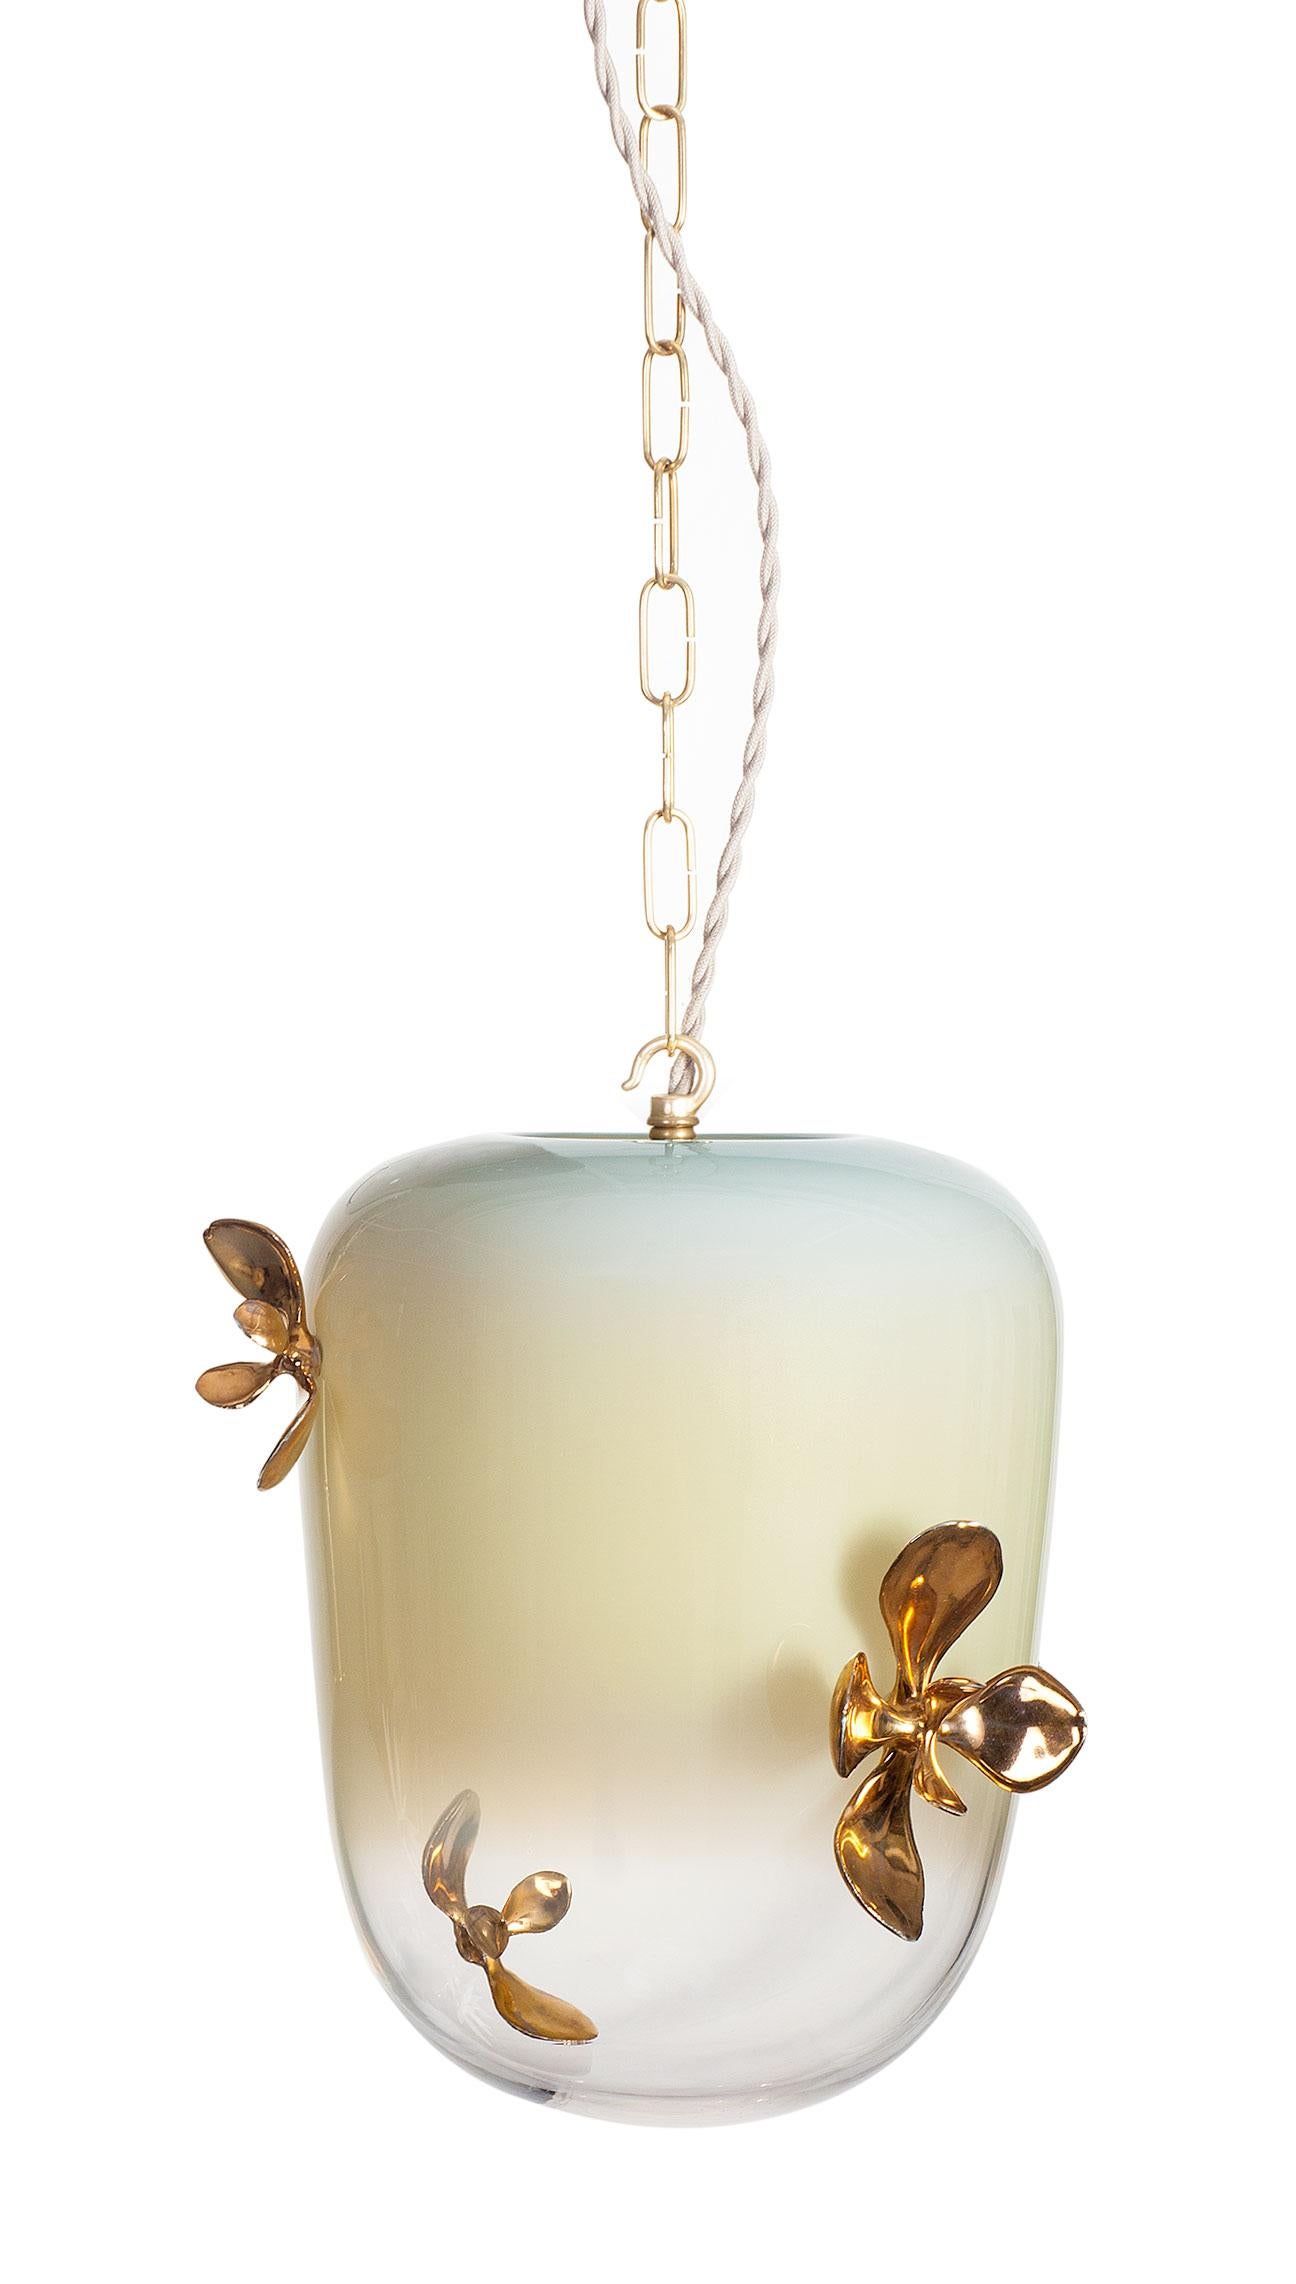 The Gia lighting collection consists of hand blown glass adorned with hand built porcelain plants. The glass pieces are offered in three forms: globe, lantern or bell.  The handcrafted porcelain ornaments are cast from live succulent plants. The